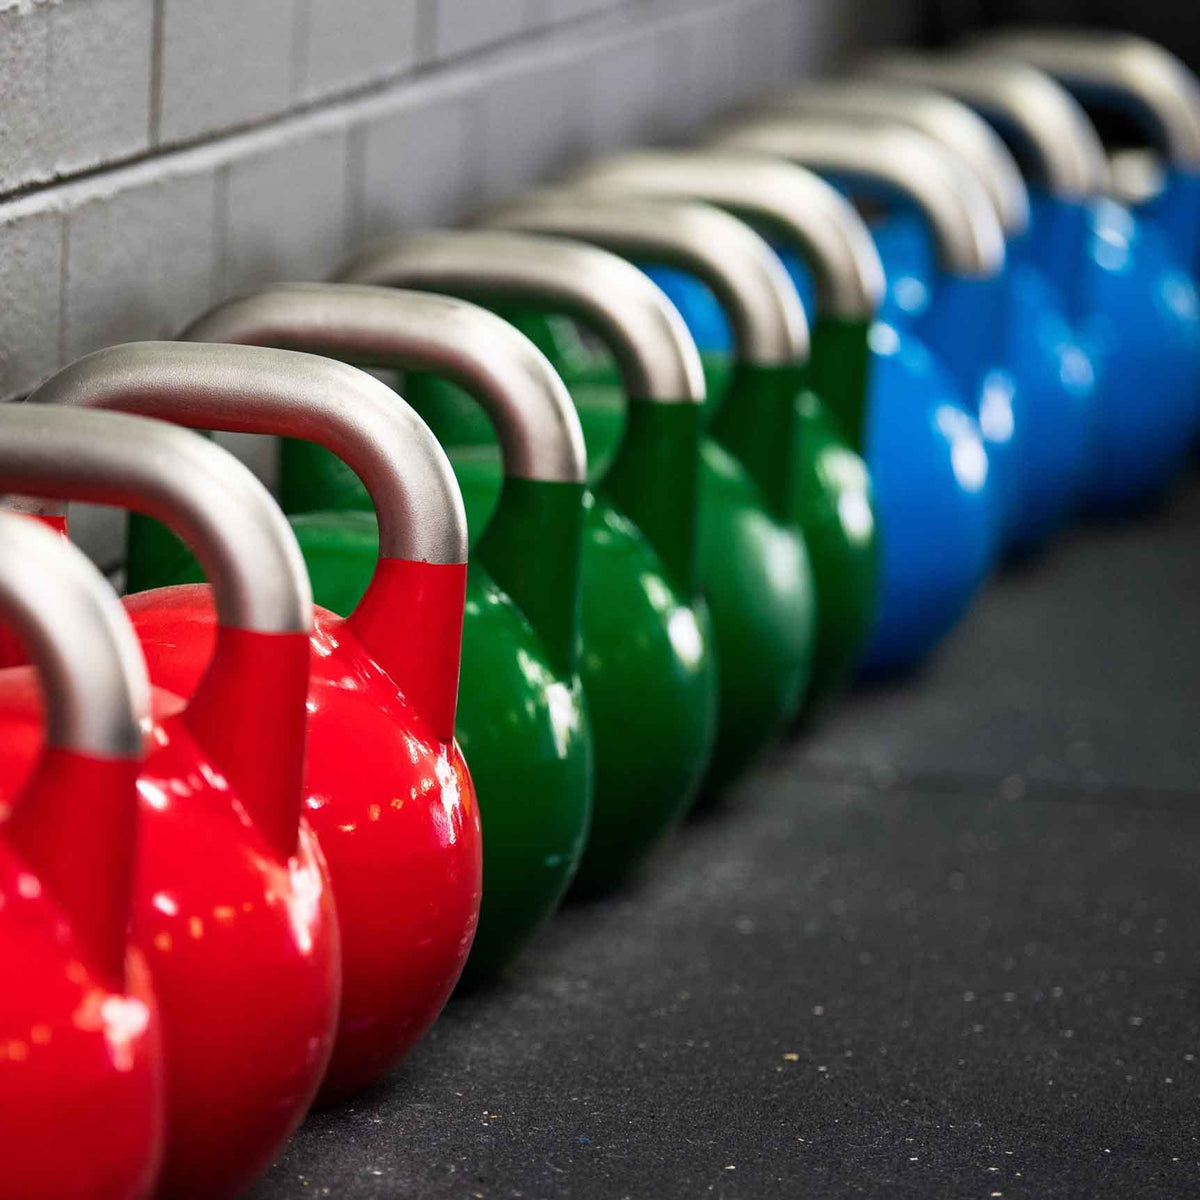 X-RIVAL Competition Kettlebell